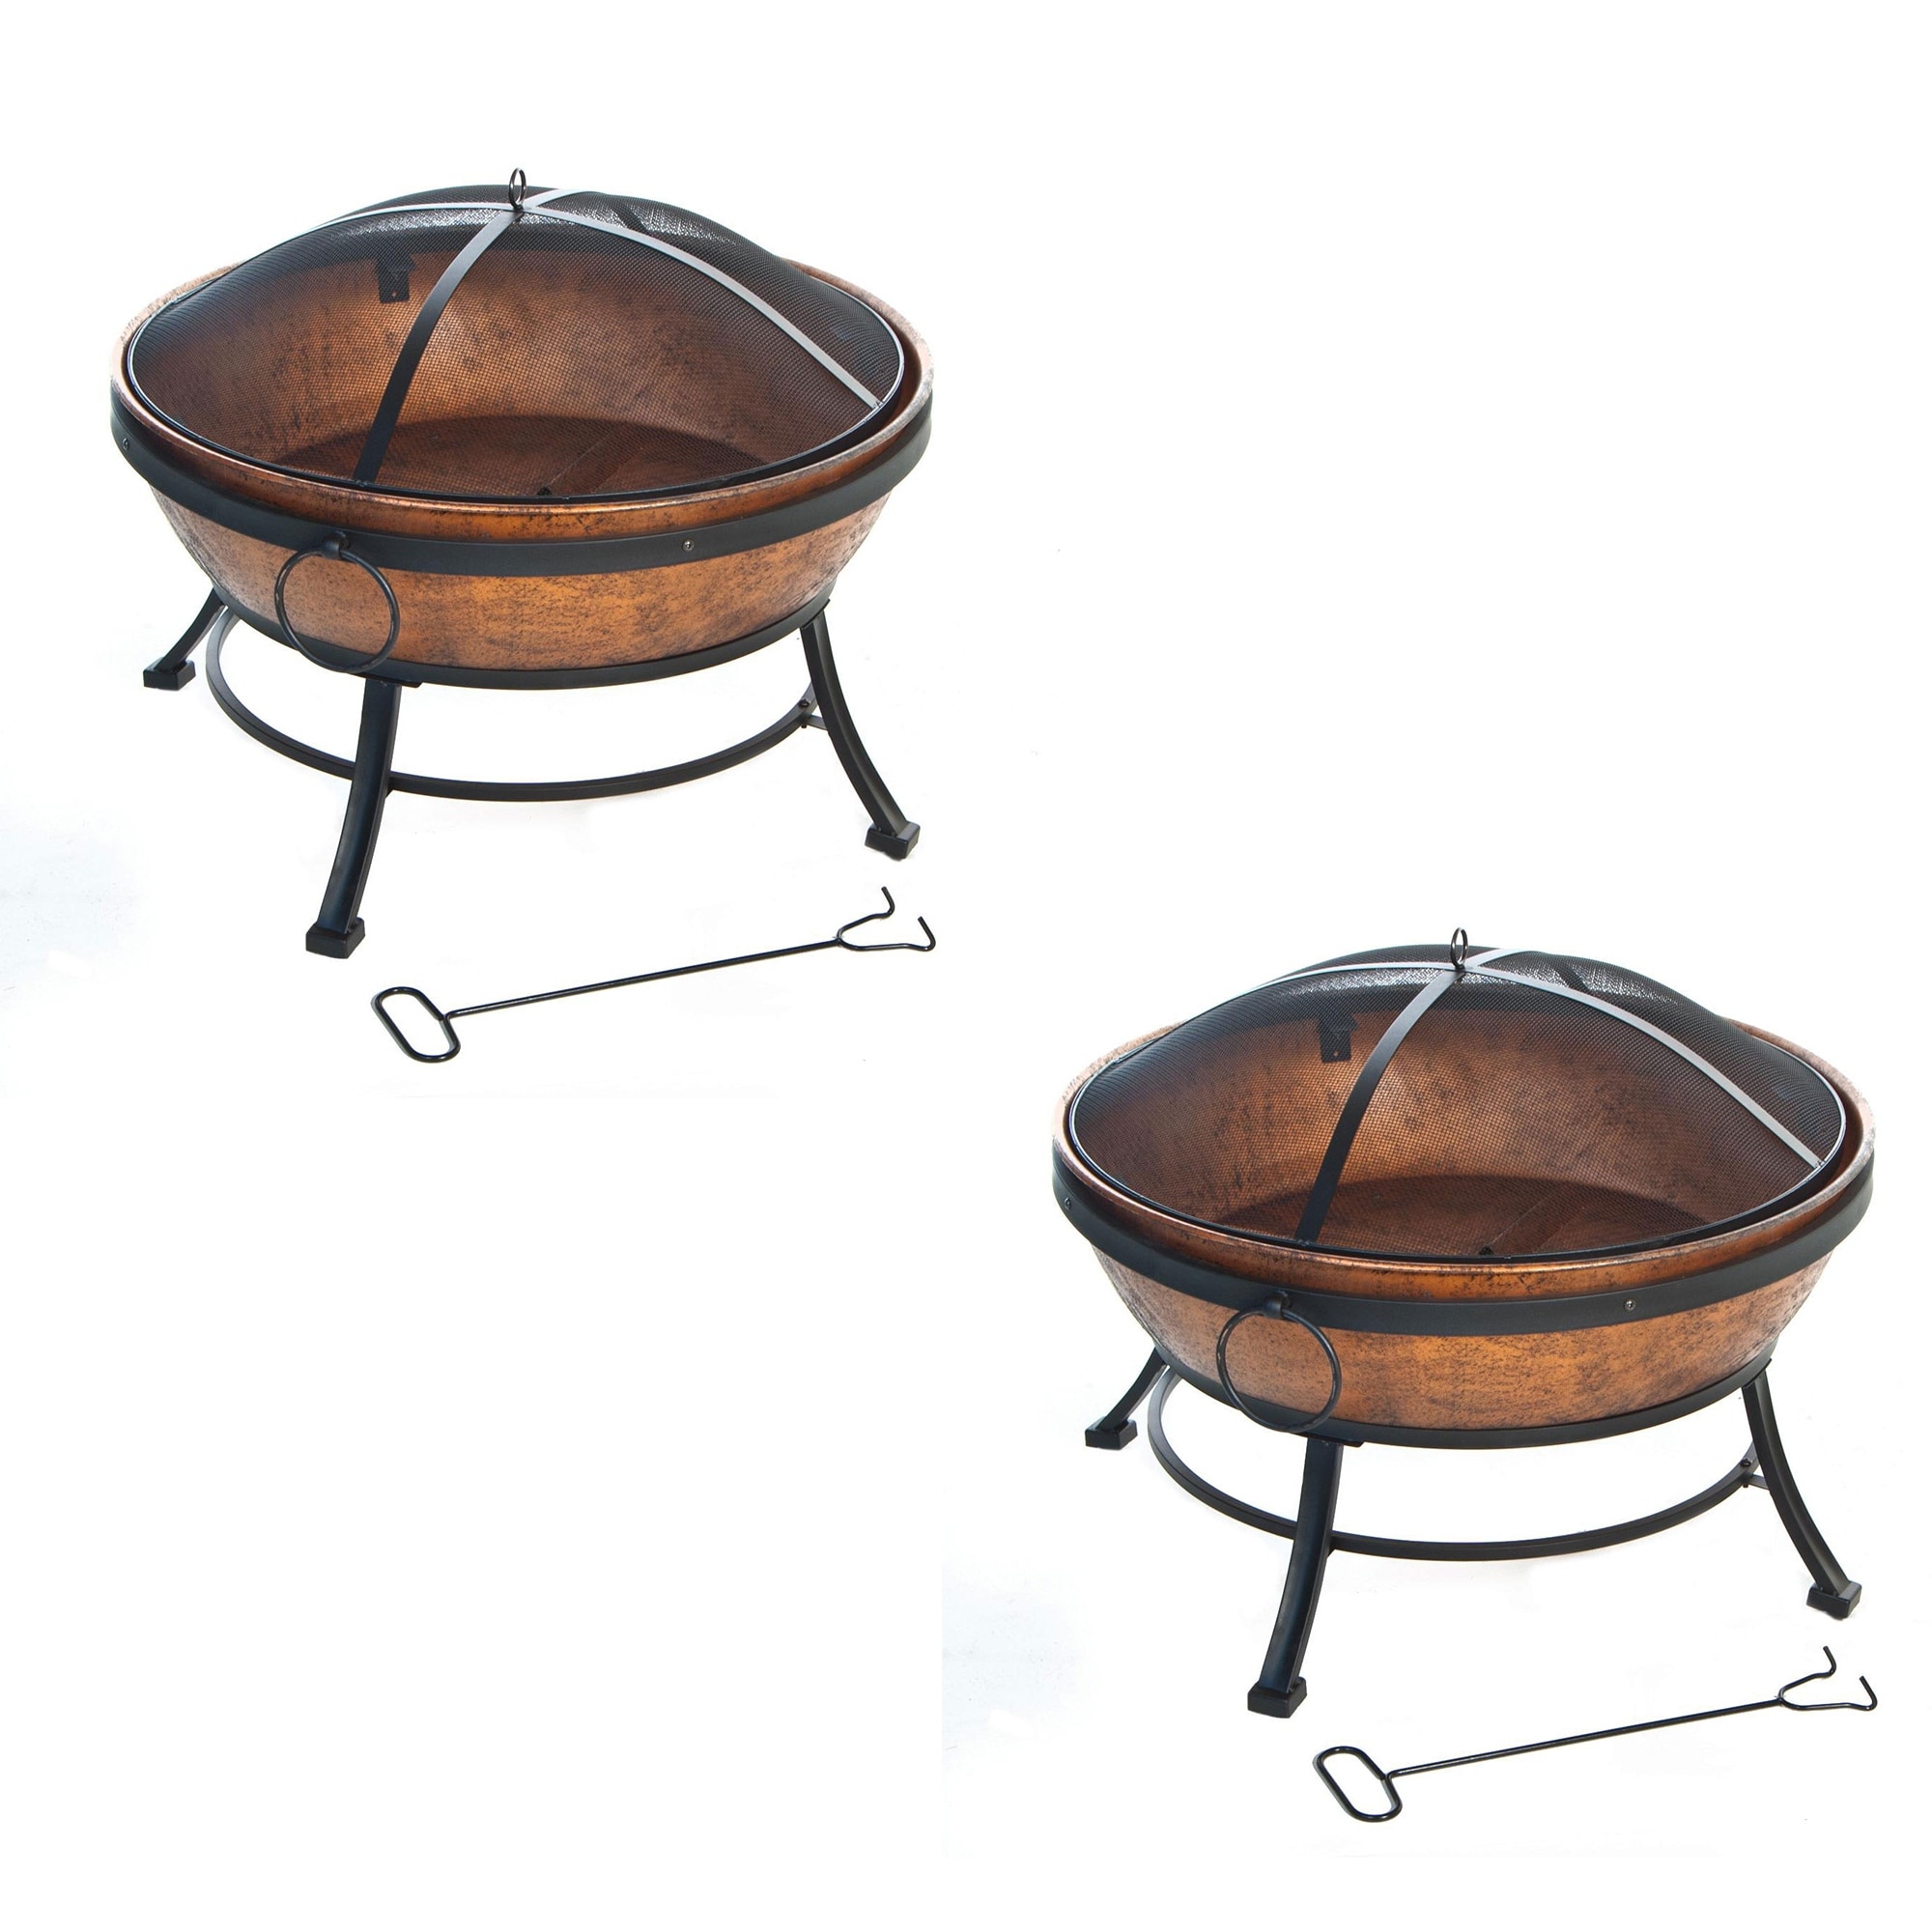 DeckMate Avondale Outdoor Patio Portable Steel Bowl Fire Pit, Copper (2 Pack)